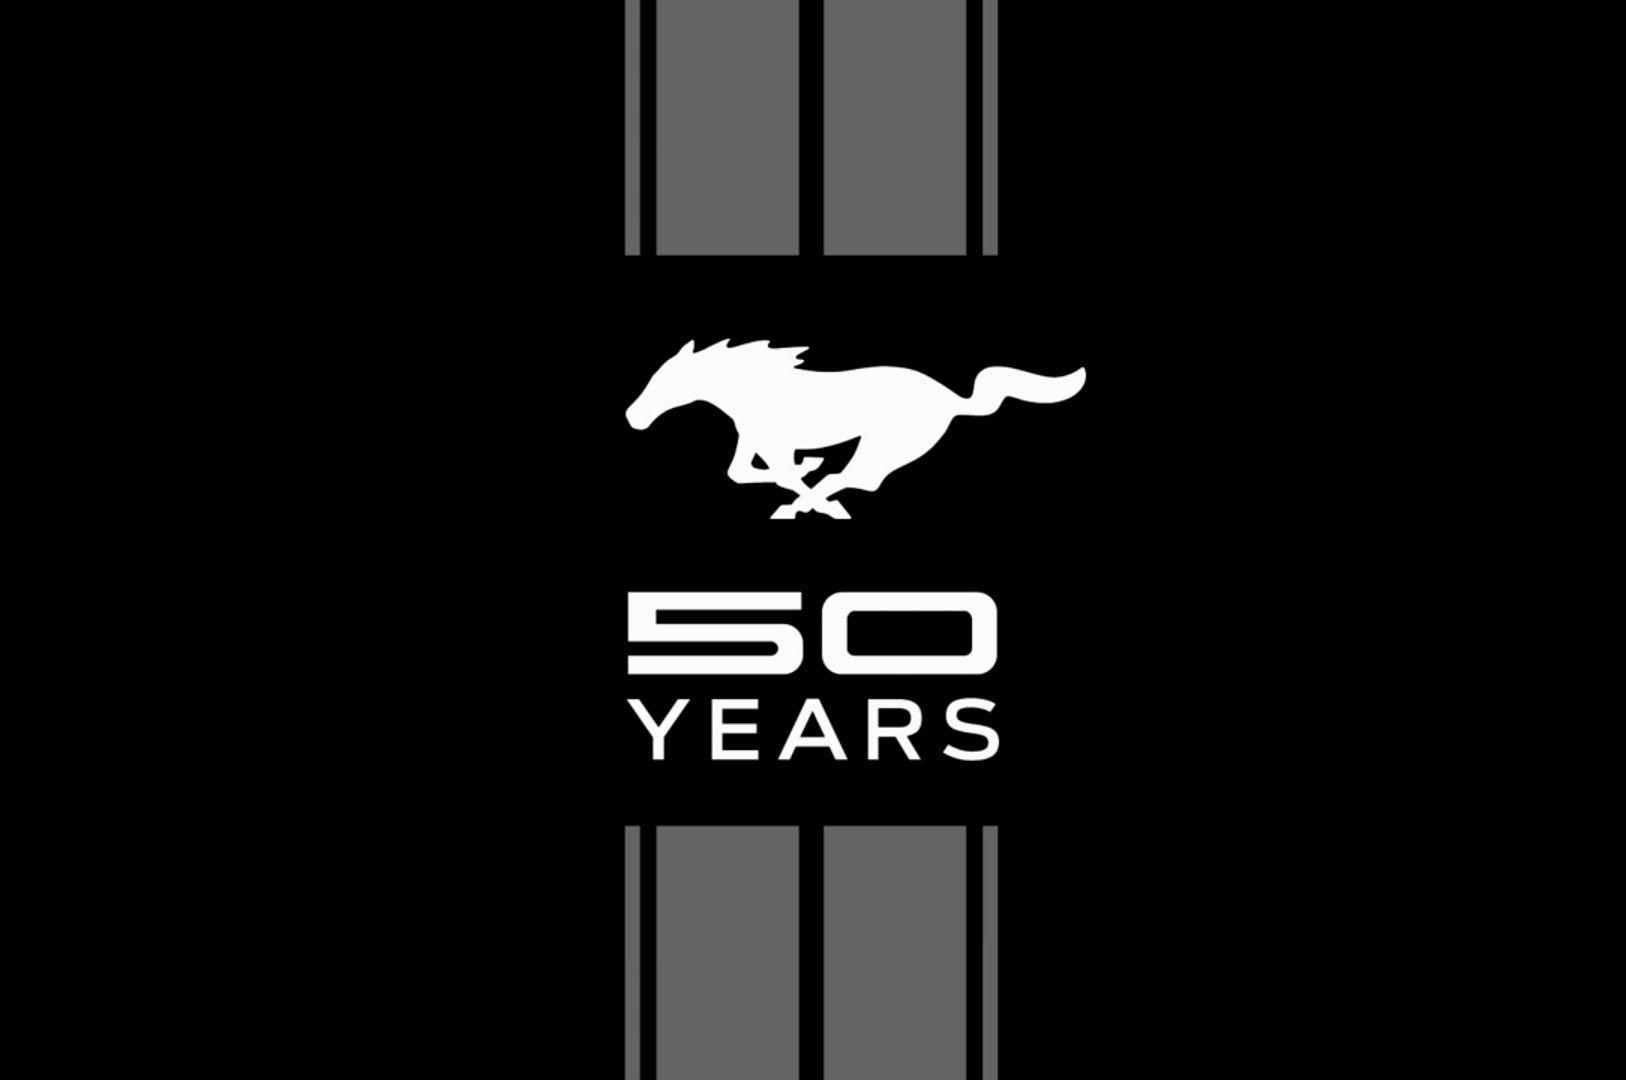 Ford Mustang 50th Anniversary Logo - First 1,000 next-gen Mustangs to be limited edition 2014 1/2 models ...